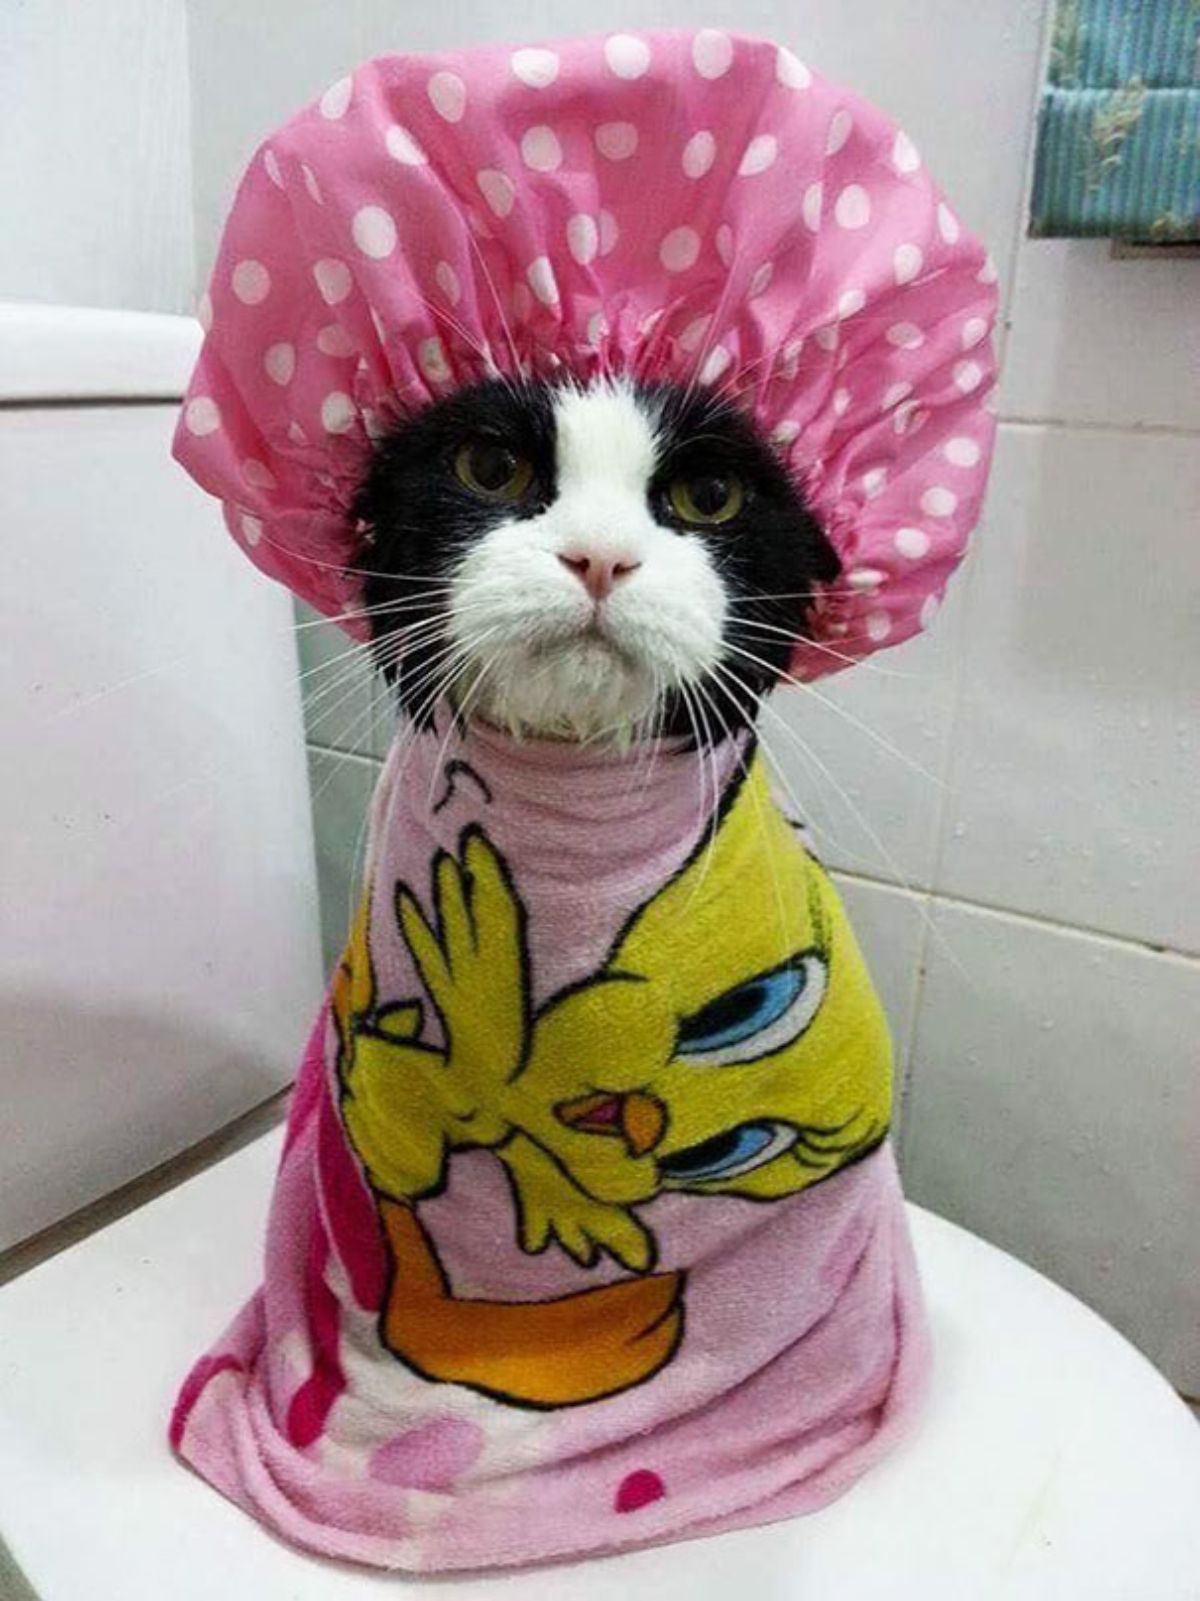 black and white cat wrapped in a pink and yellow tweety bird towel and wearing a pink and white polka dotted shower cap